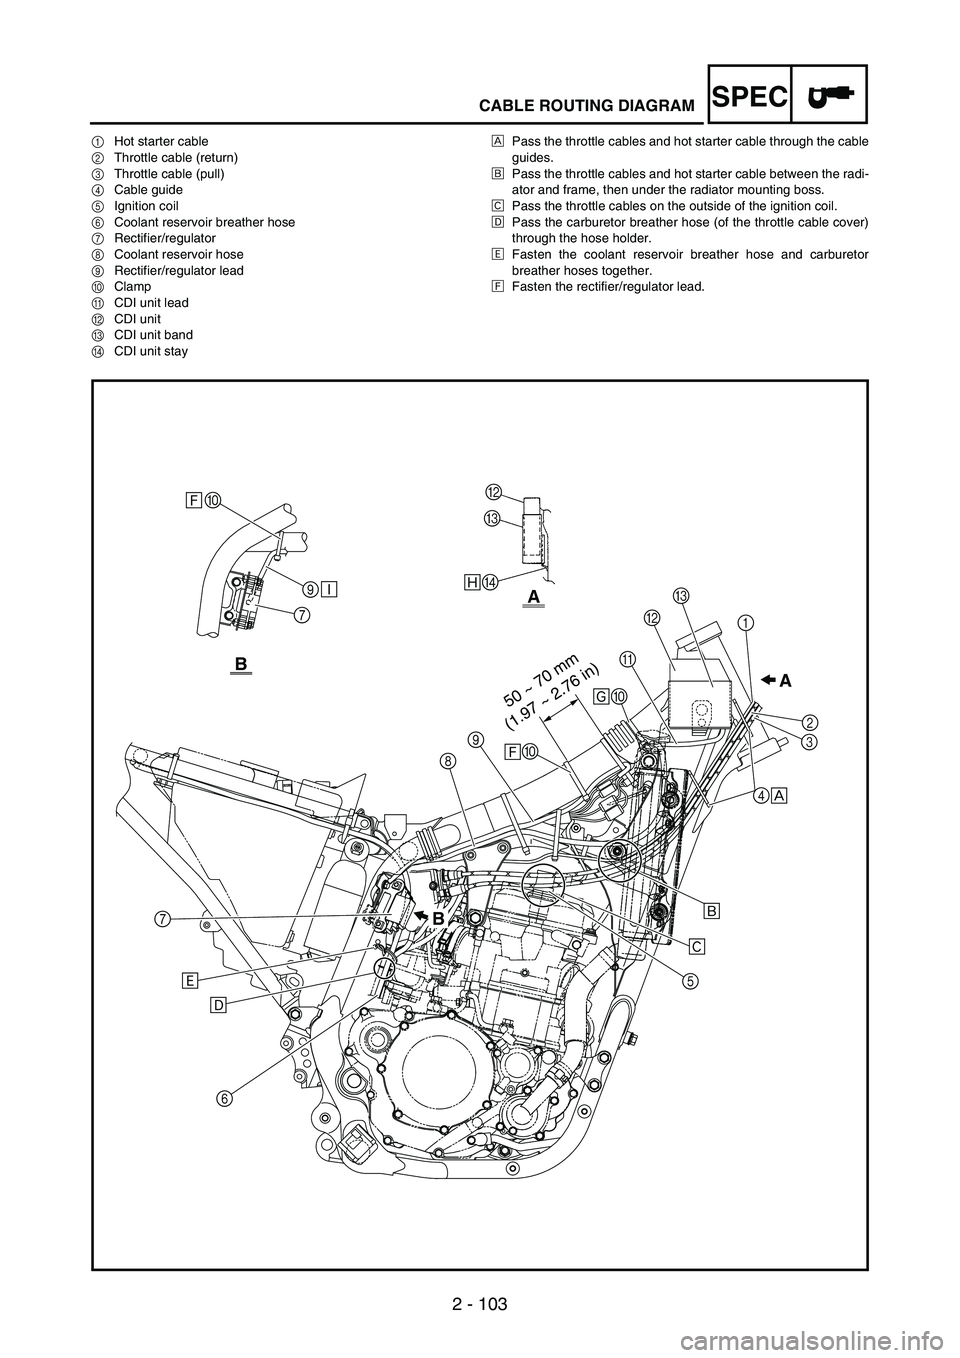 YAMAHA WR 250F 2005  Owners Manual SPEC
2 - 103
CABLE ROUTING DIAGRAM
1Hot starter cable
2Throttle cable (return)
3Throttle cable (pull)
4Cable guide
5Ignition coil
6Coolant reservoir breather hose
7Rectifier/regulator
8Coolant reservo